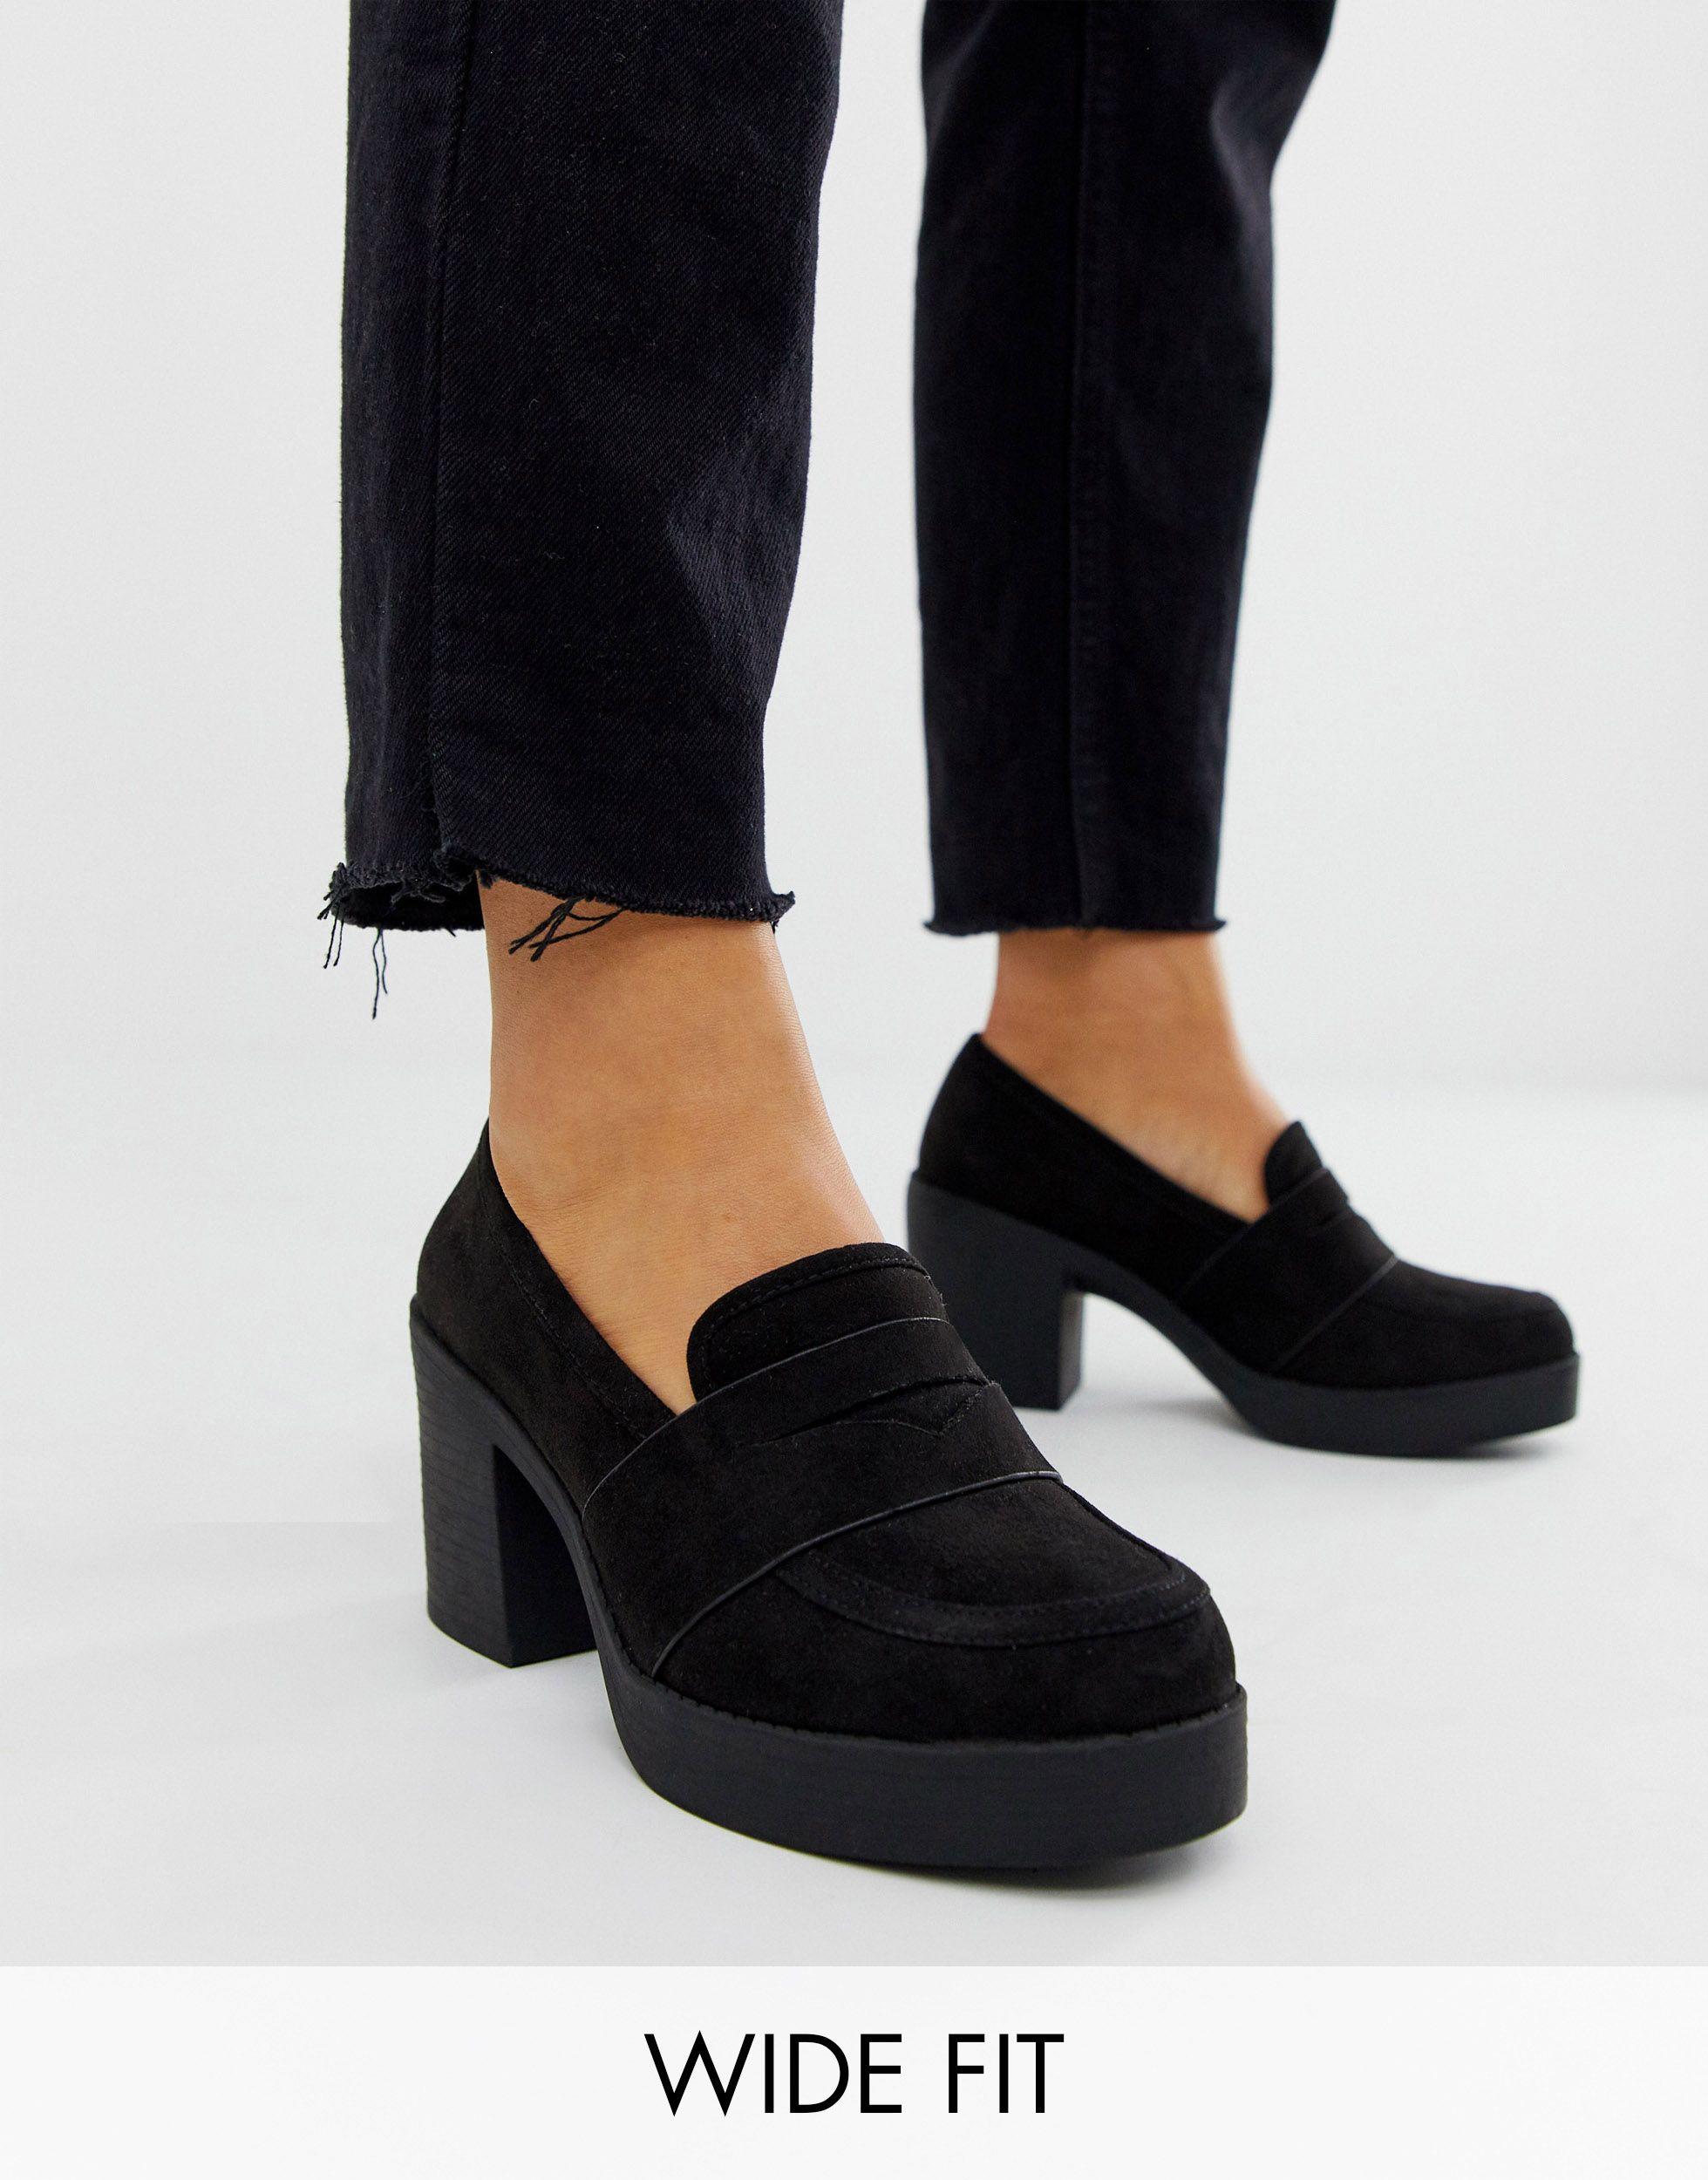 wide black loafers